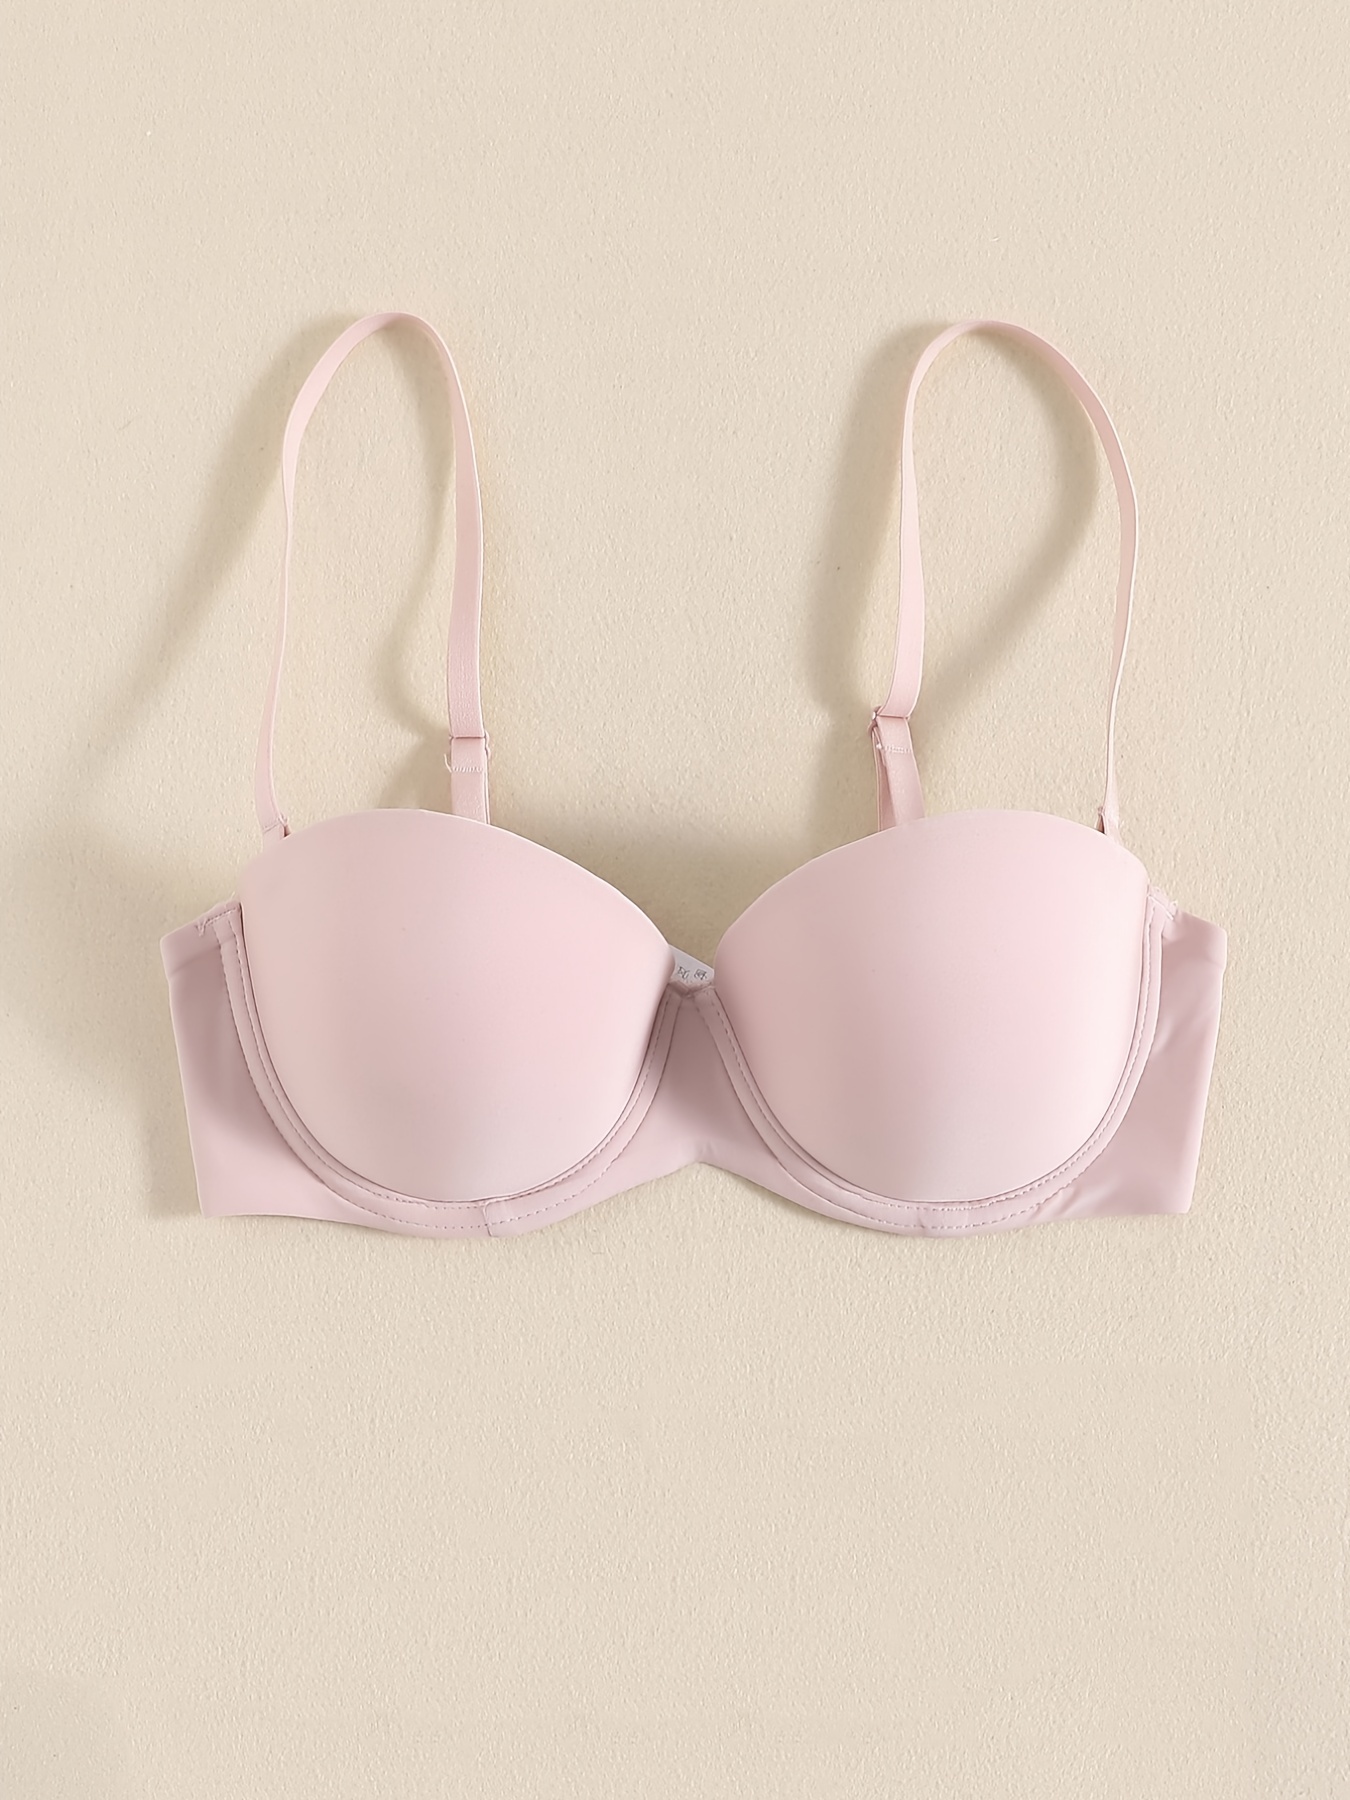 Lace Cup Micro Bra Pink